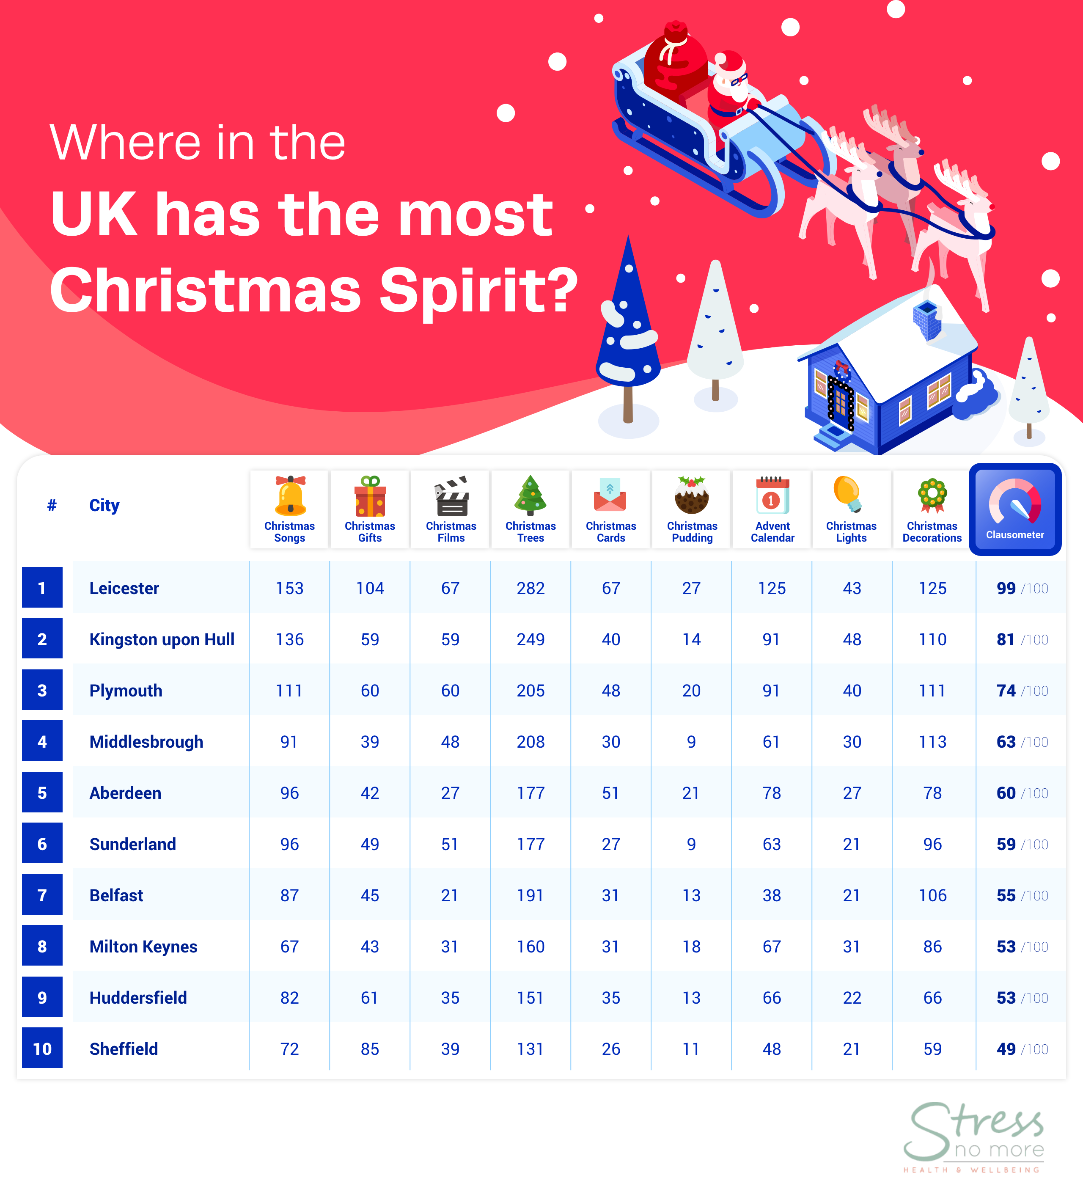 Where in the UK has the most Christmas spirit?